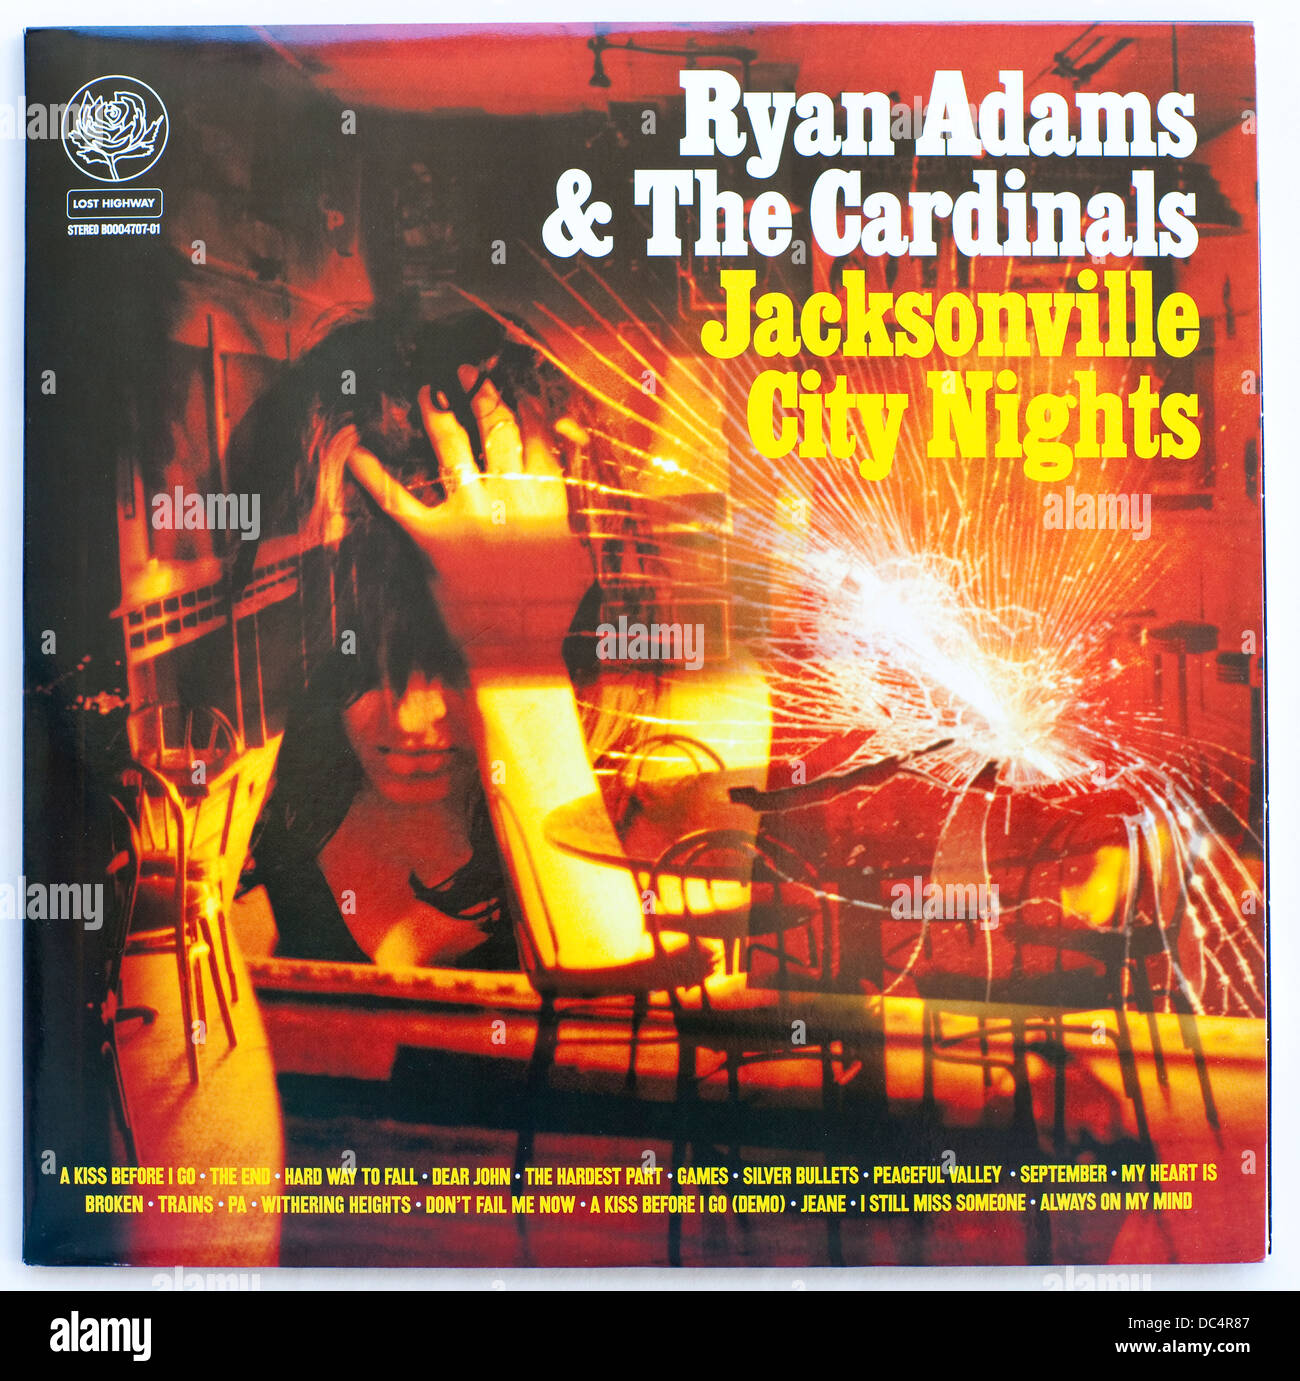 Ryan Adams & The Cardinals - Jacksonville City Nights, 2005 double album on Lost Highway Records - Editorial use only Stock Photo